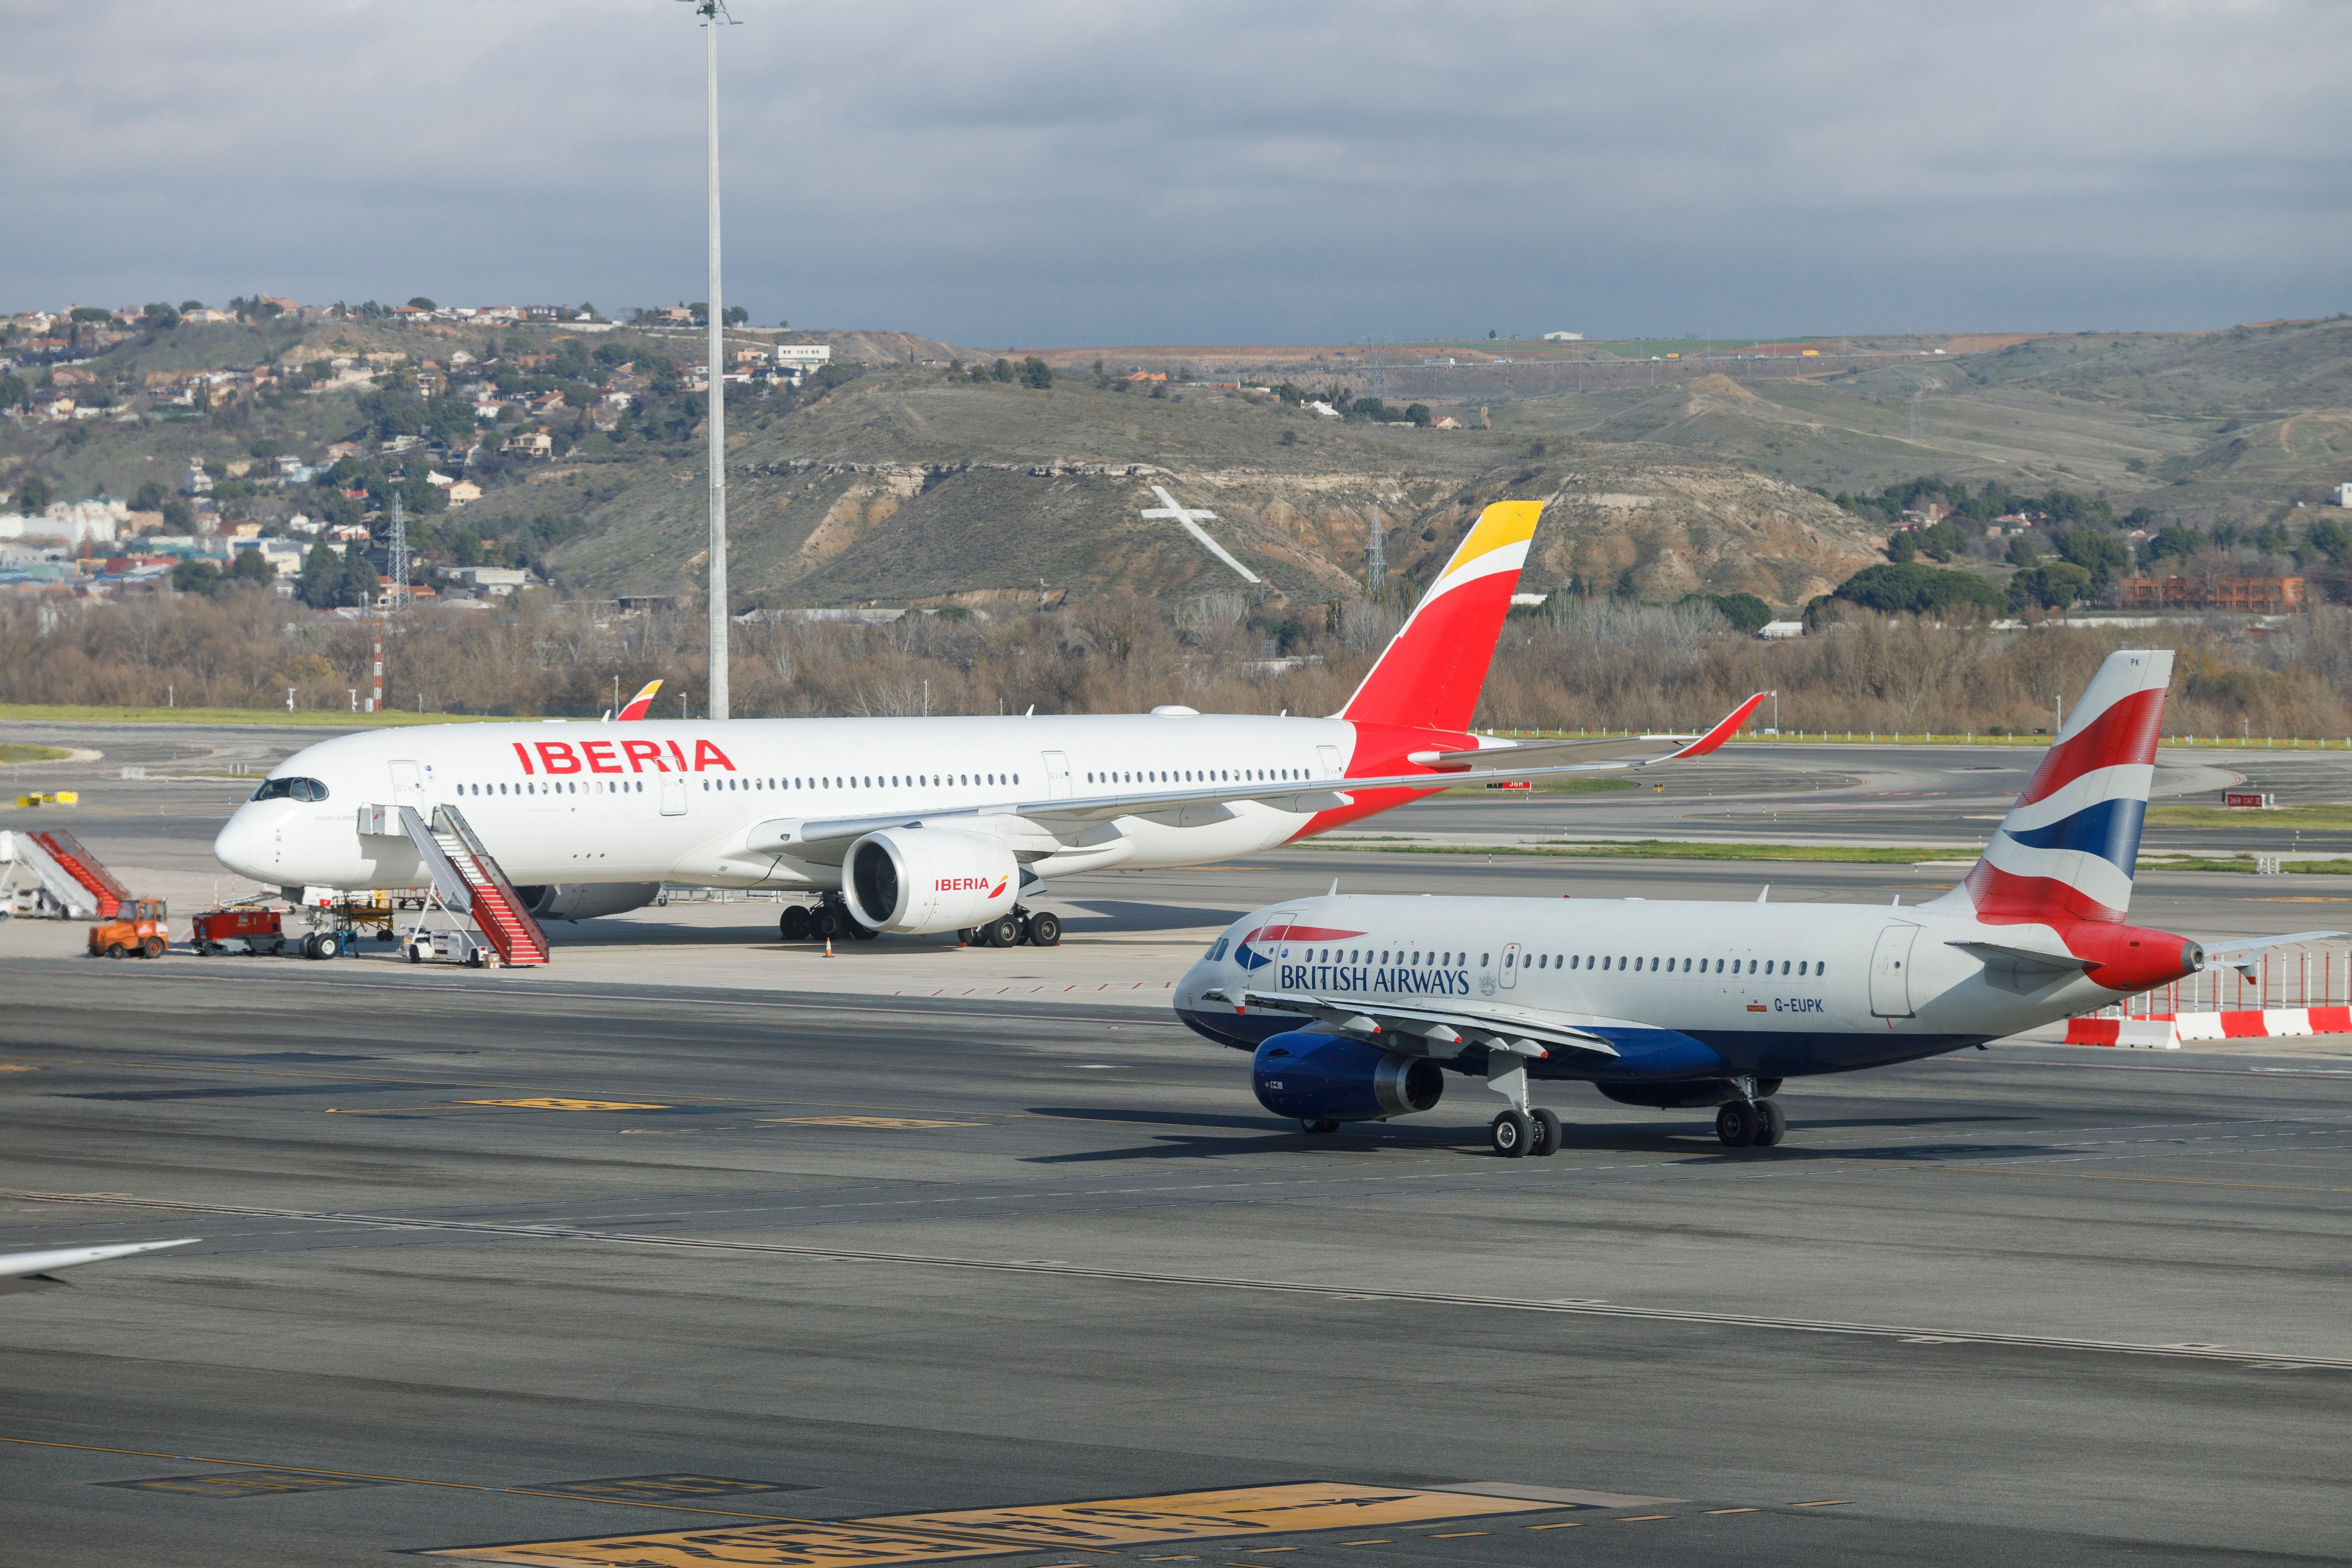 British Airways Airbus A319 Taxiing Past Iberia Airbus A350